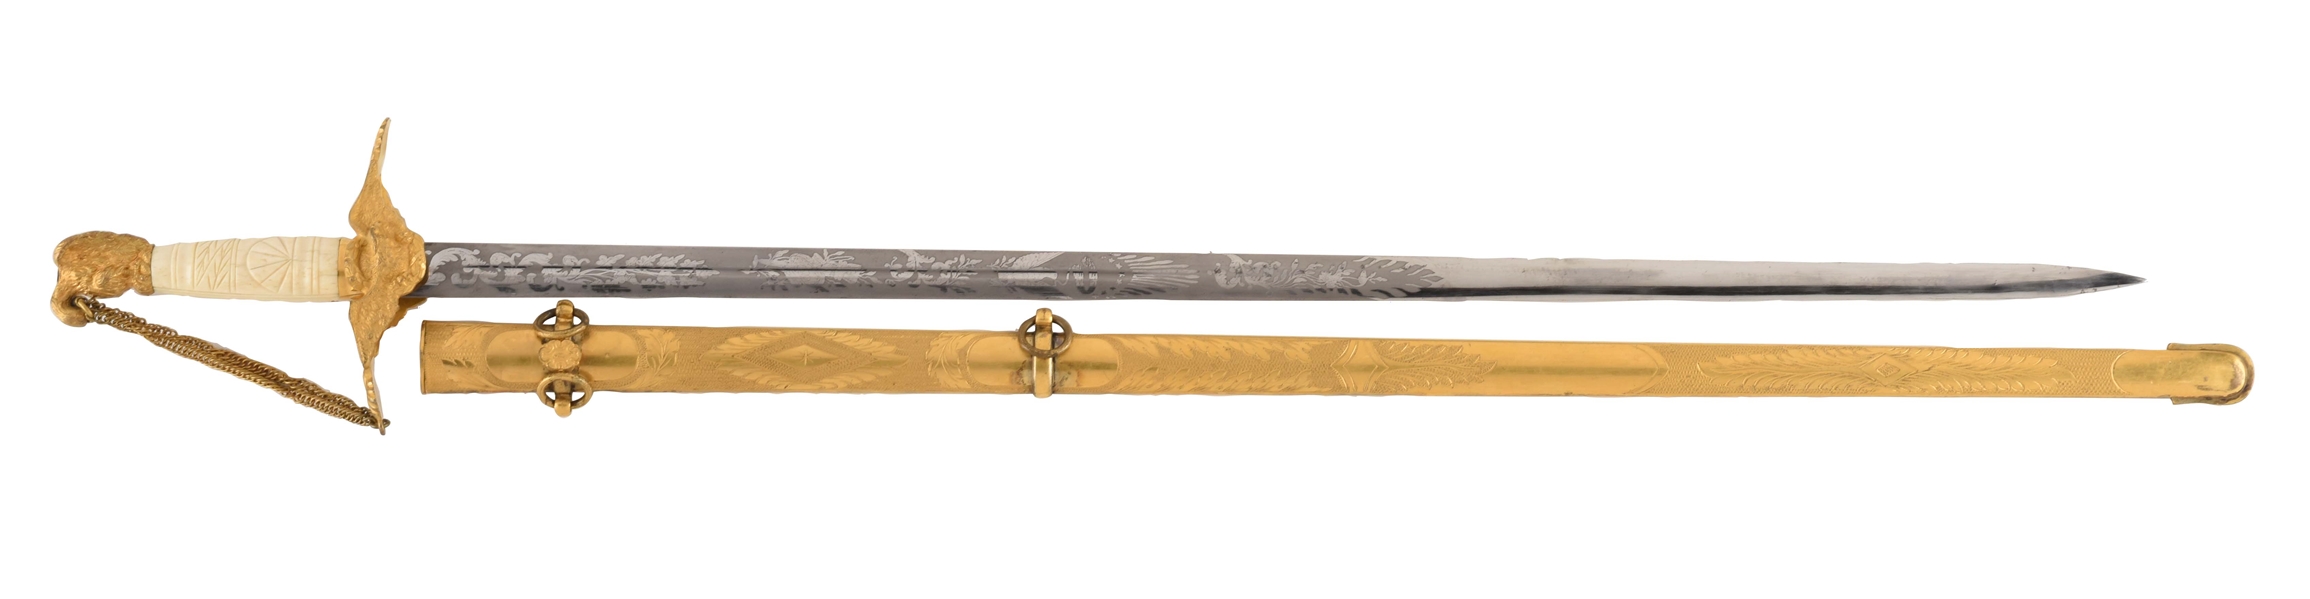 FINE, HIGH GRADE AMES MILITARY STAFF OFFICER SWORD WITH SCABBARD. 